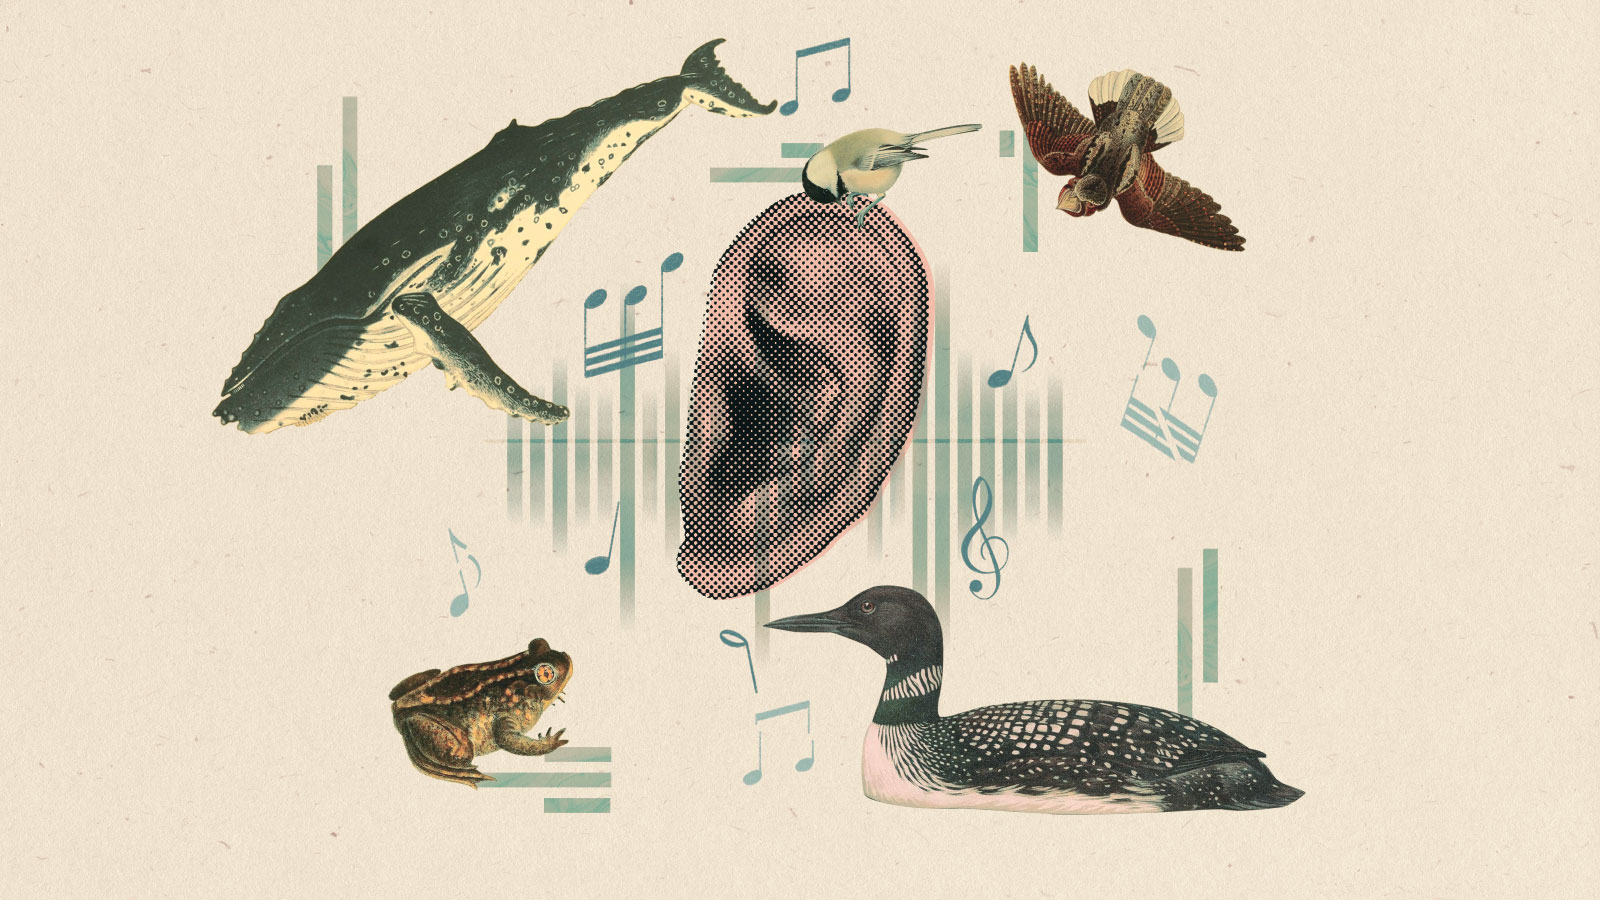 Collage: an ear surrounded by vintage illustrations of a chickadee, a whippoorwill, a loon, a toad, and a humpback whale, music notes, sound waves, and cutout bars of marbled texture